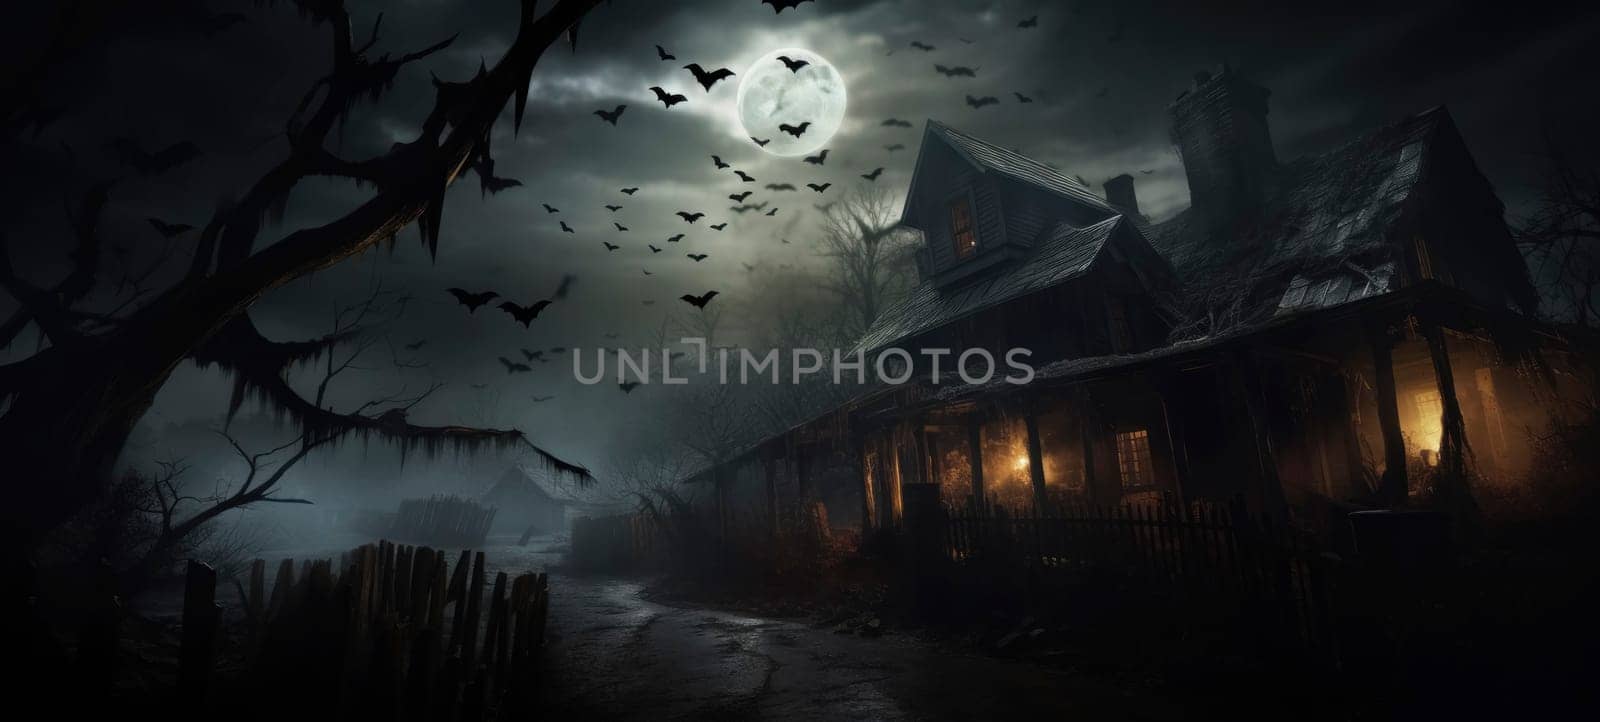 Abandoned House with Bats at Night by andreyz